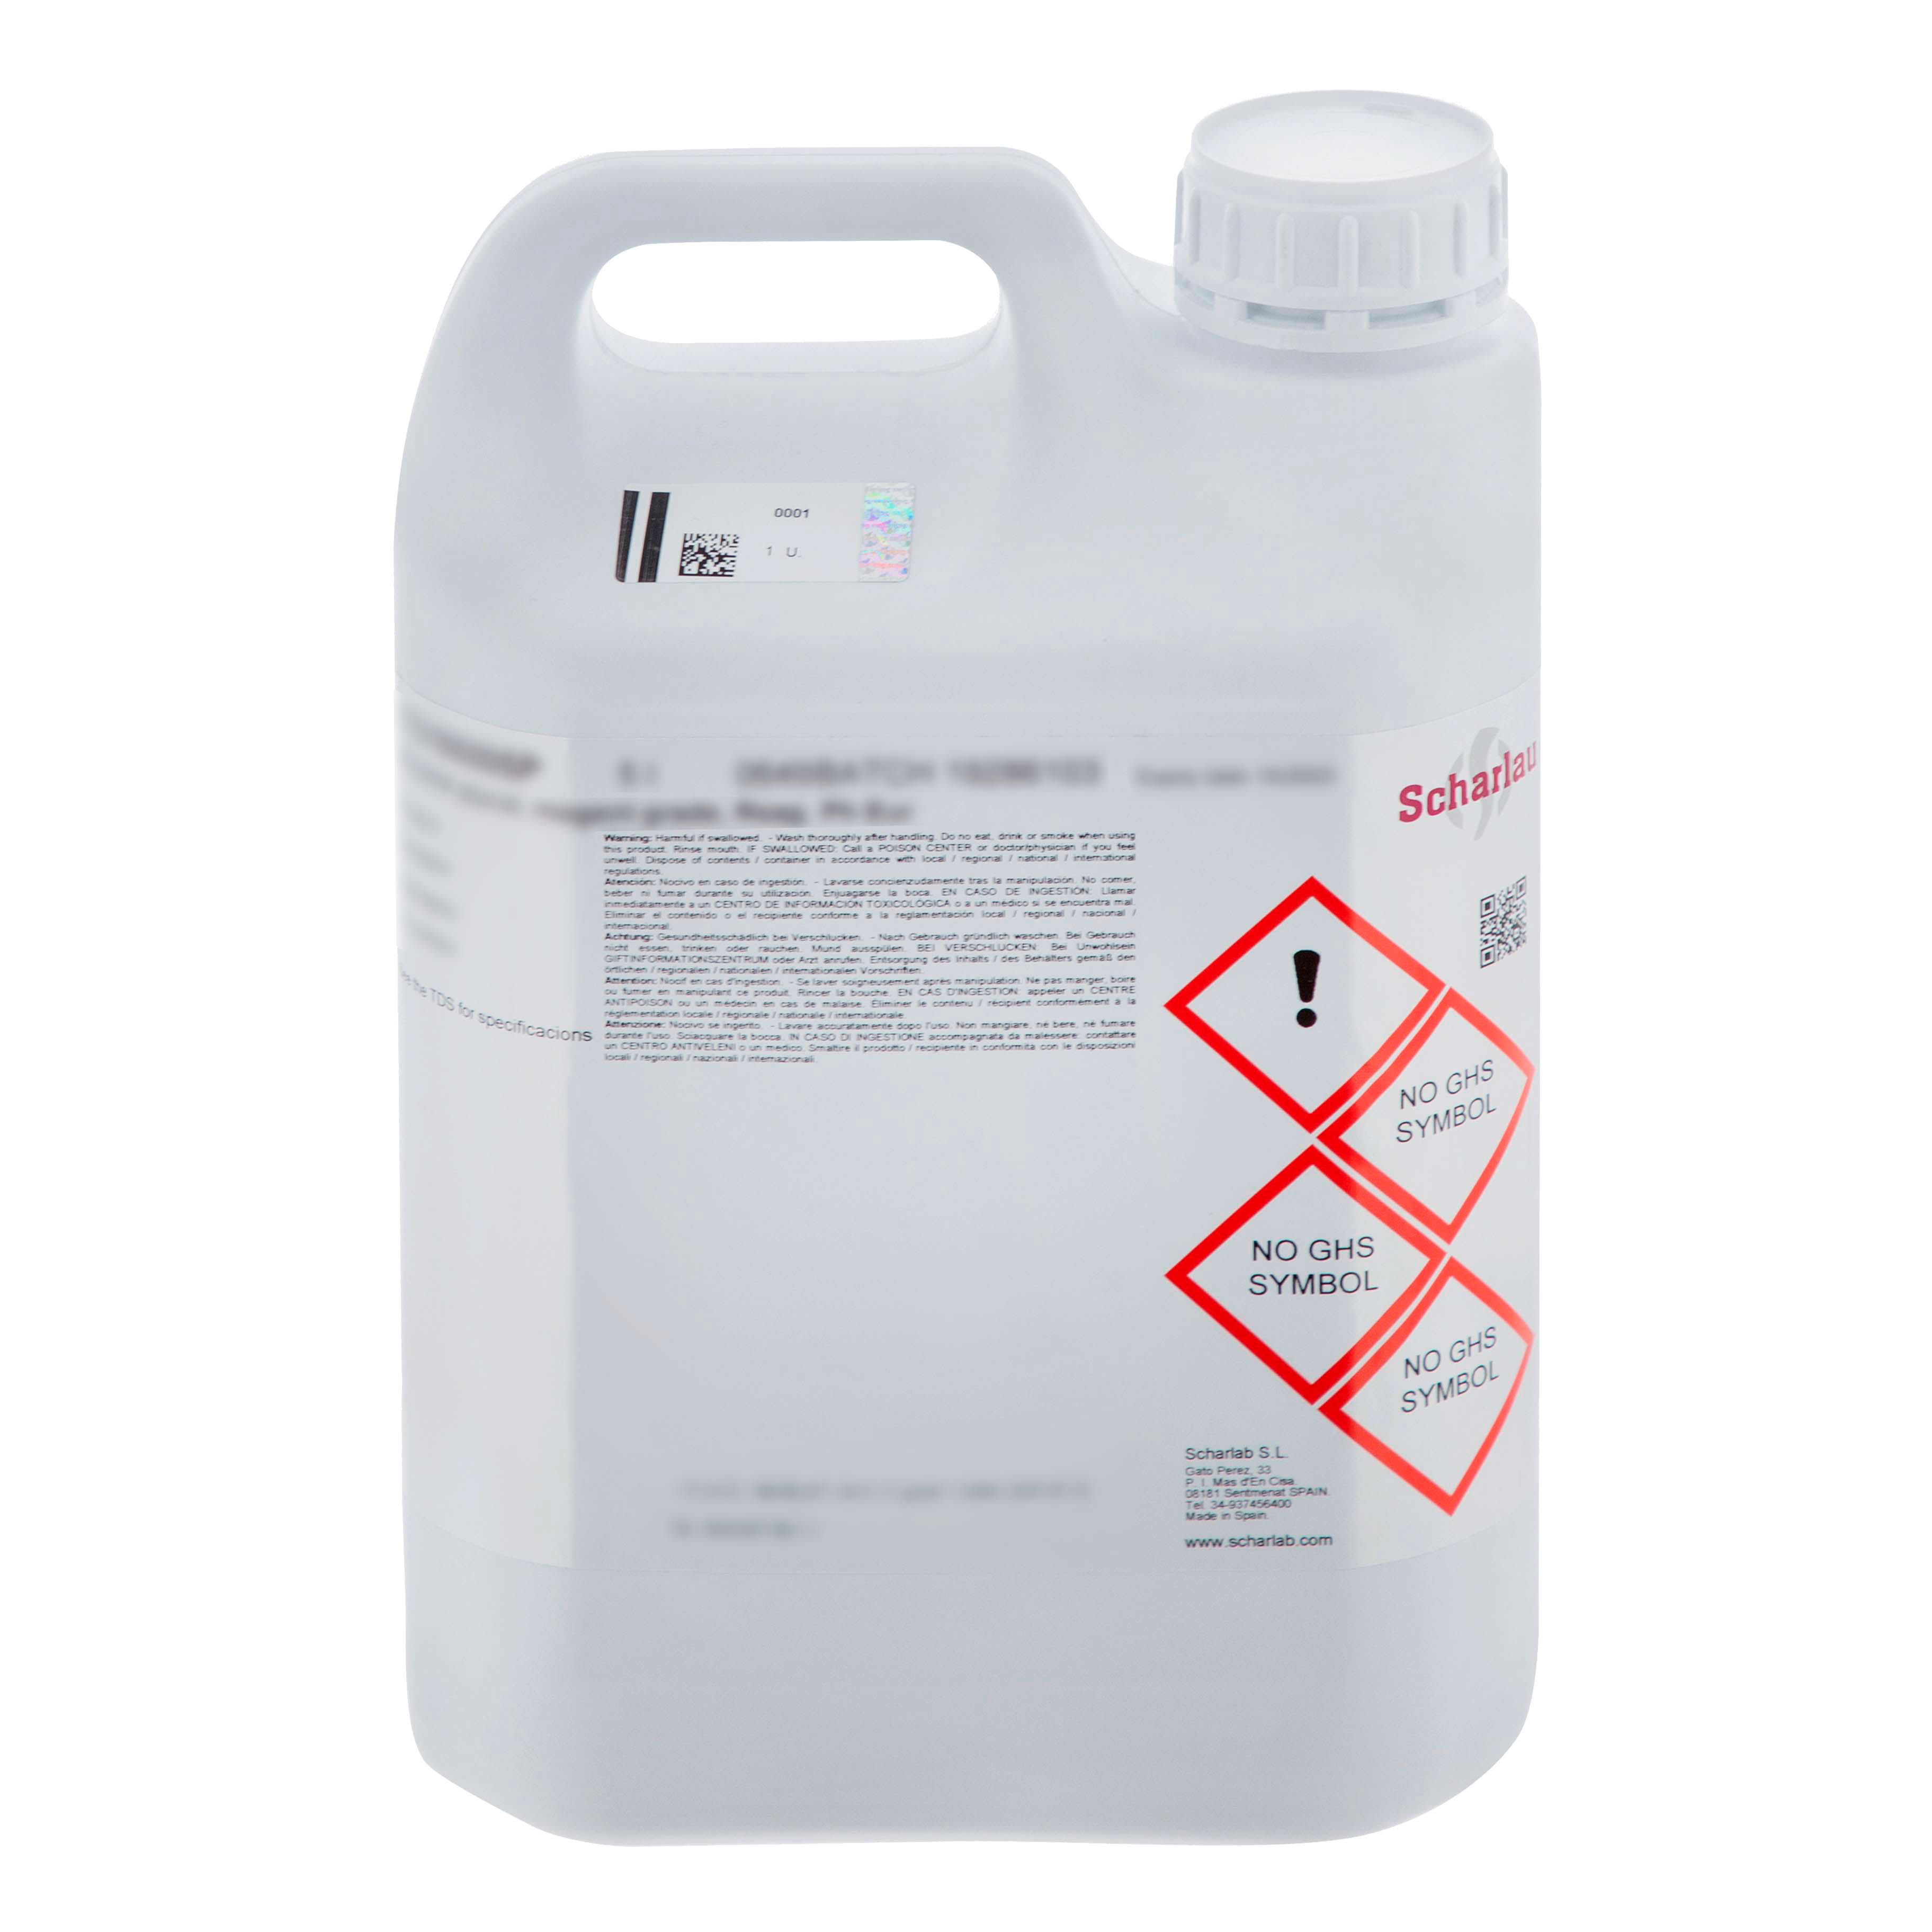 Sulfuric acid, solution 90 - 91% w/w, for Gerber fat determination and testing nitrates in milk, Sulphuric acid